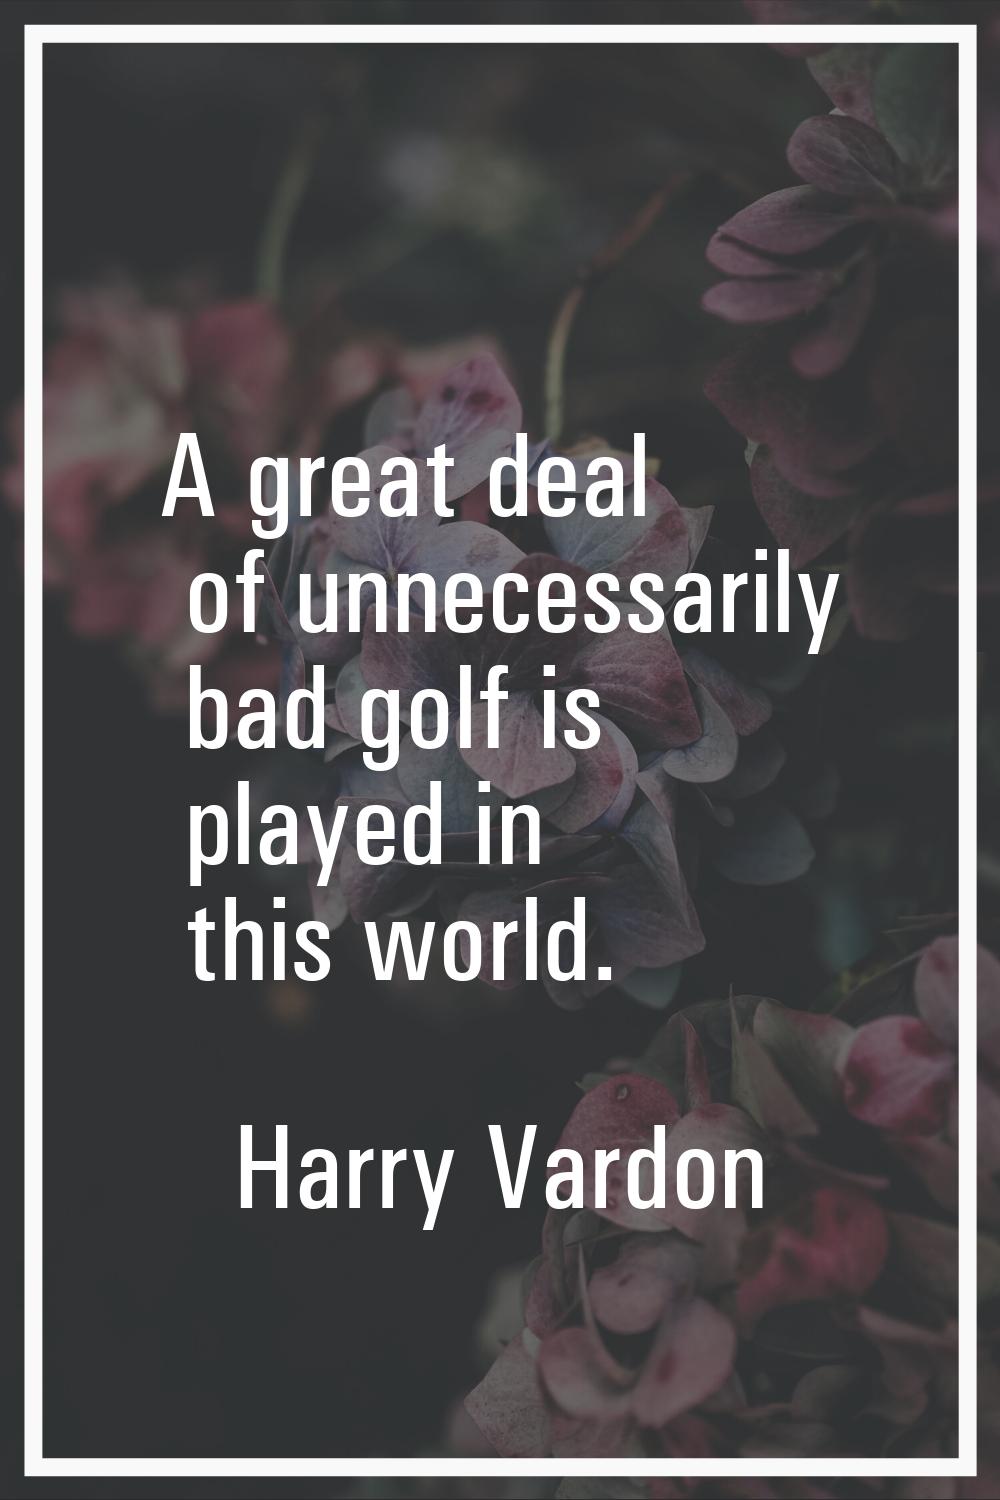 A great deal of unnecessarily bad golf is played in this world.